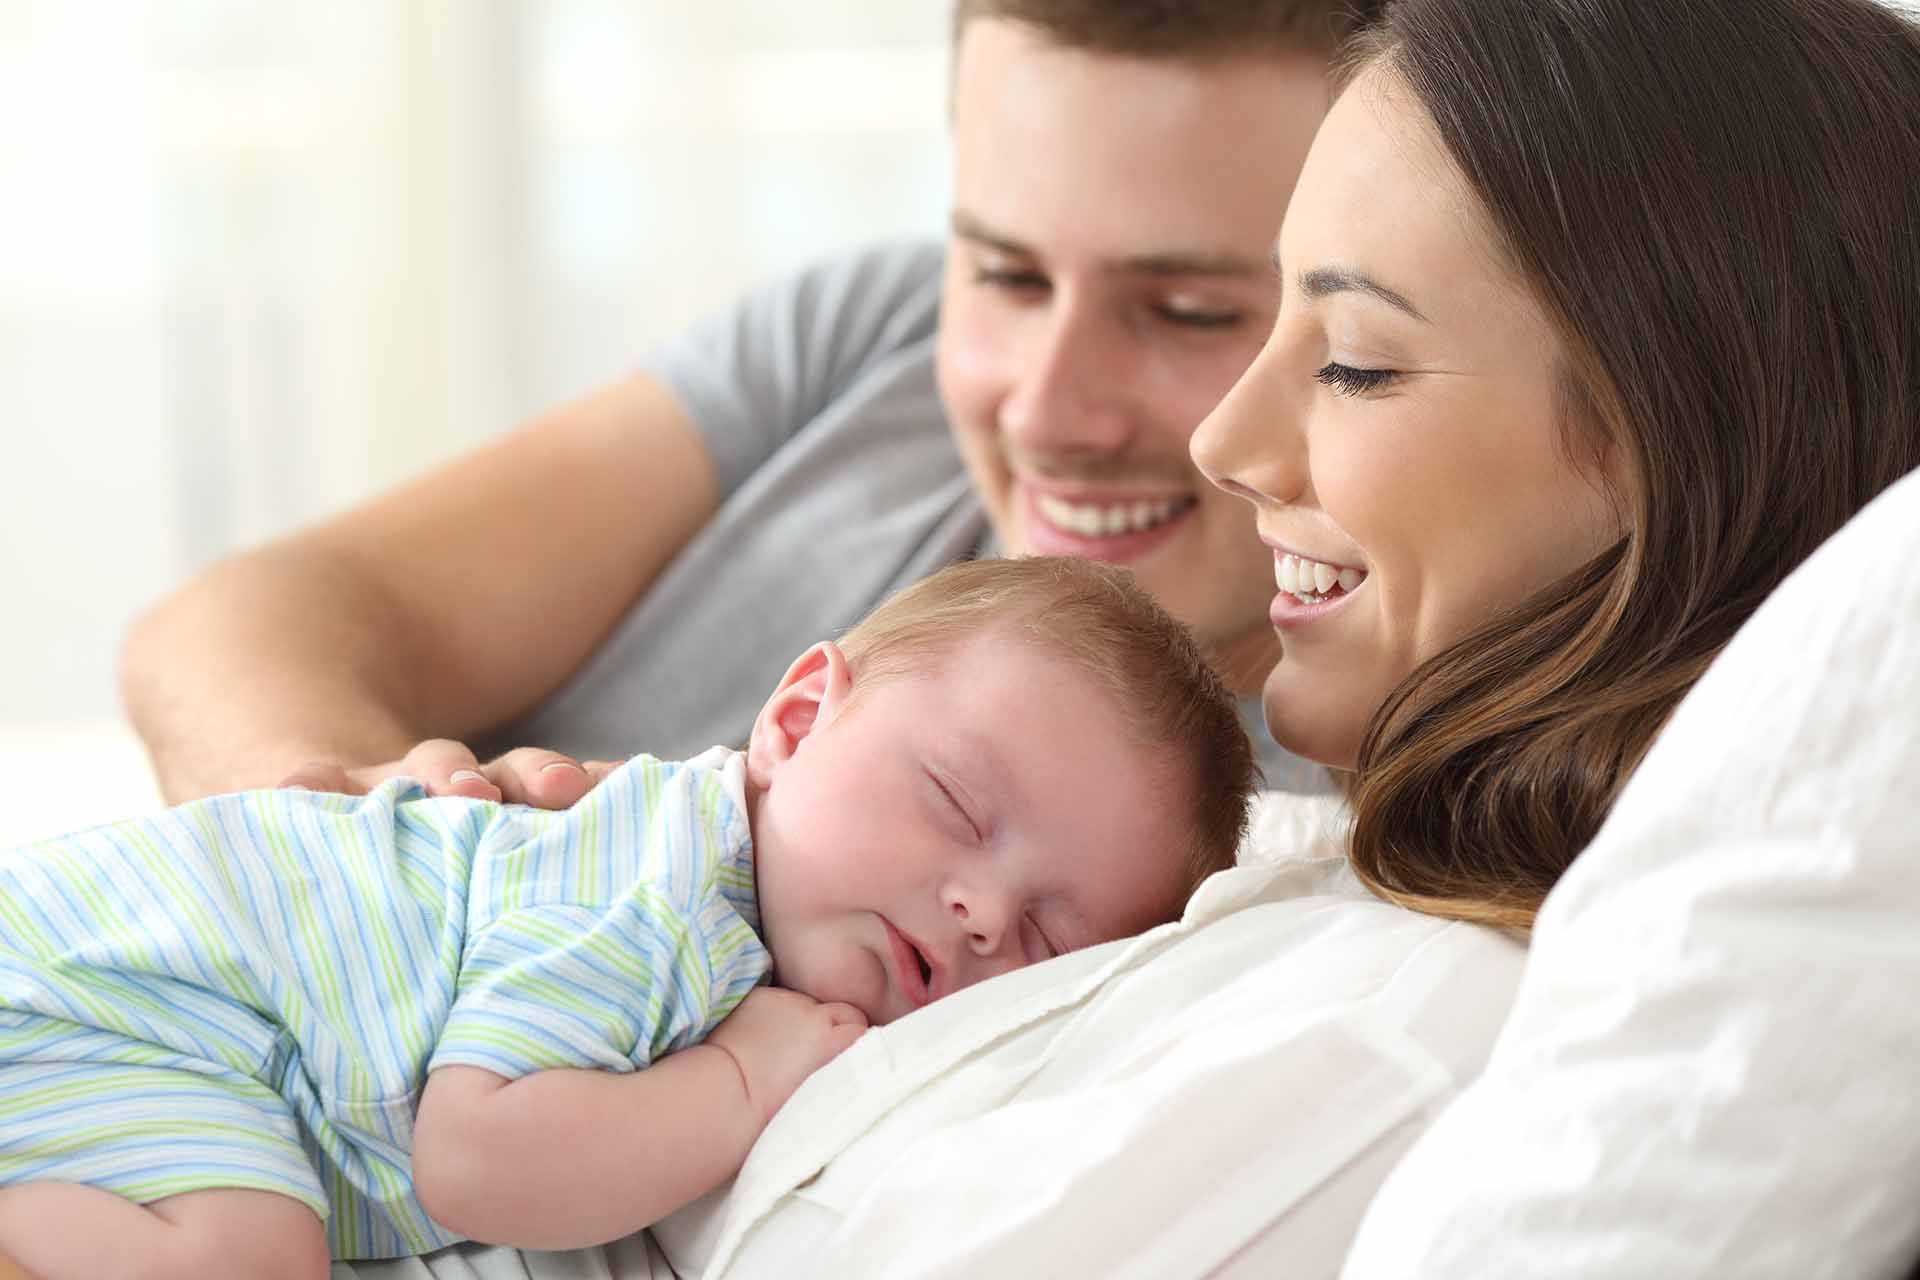 Parents are happy that their baby sleeps